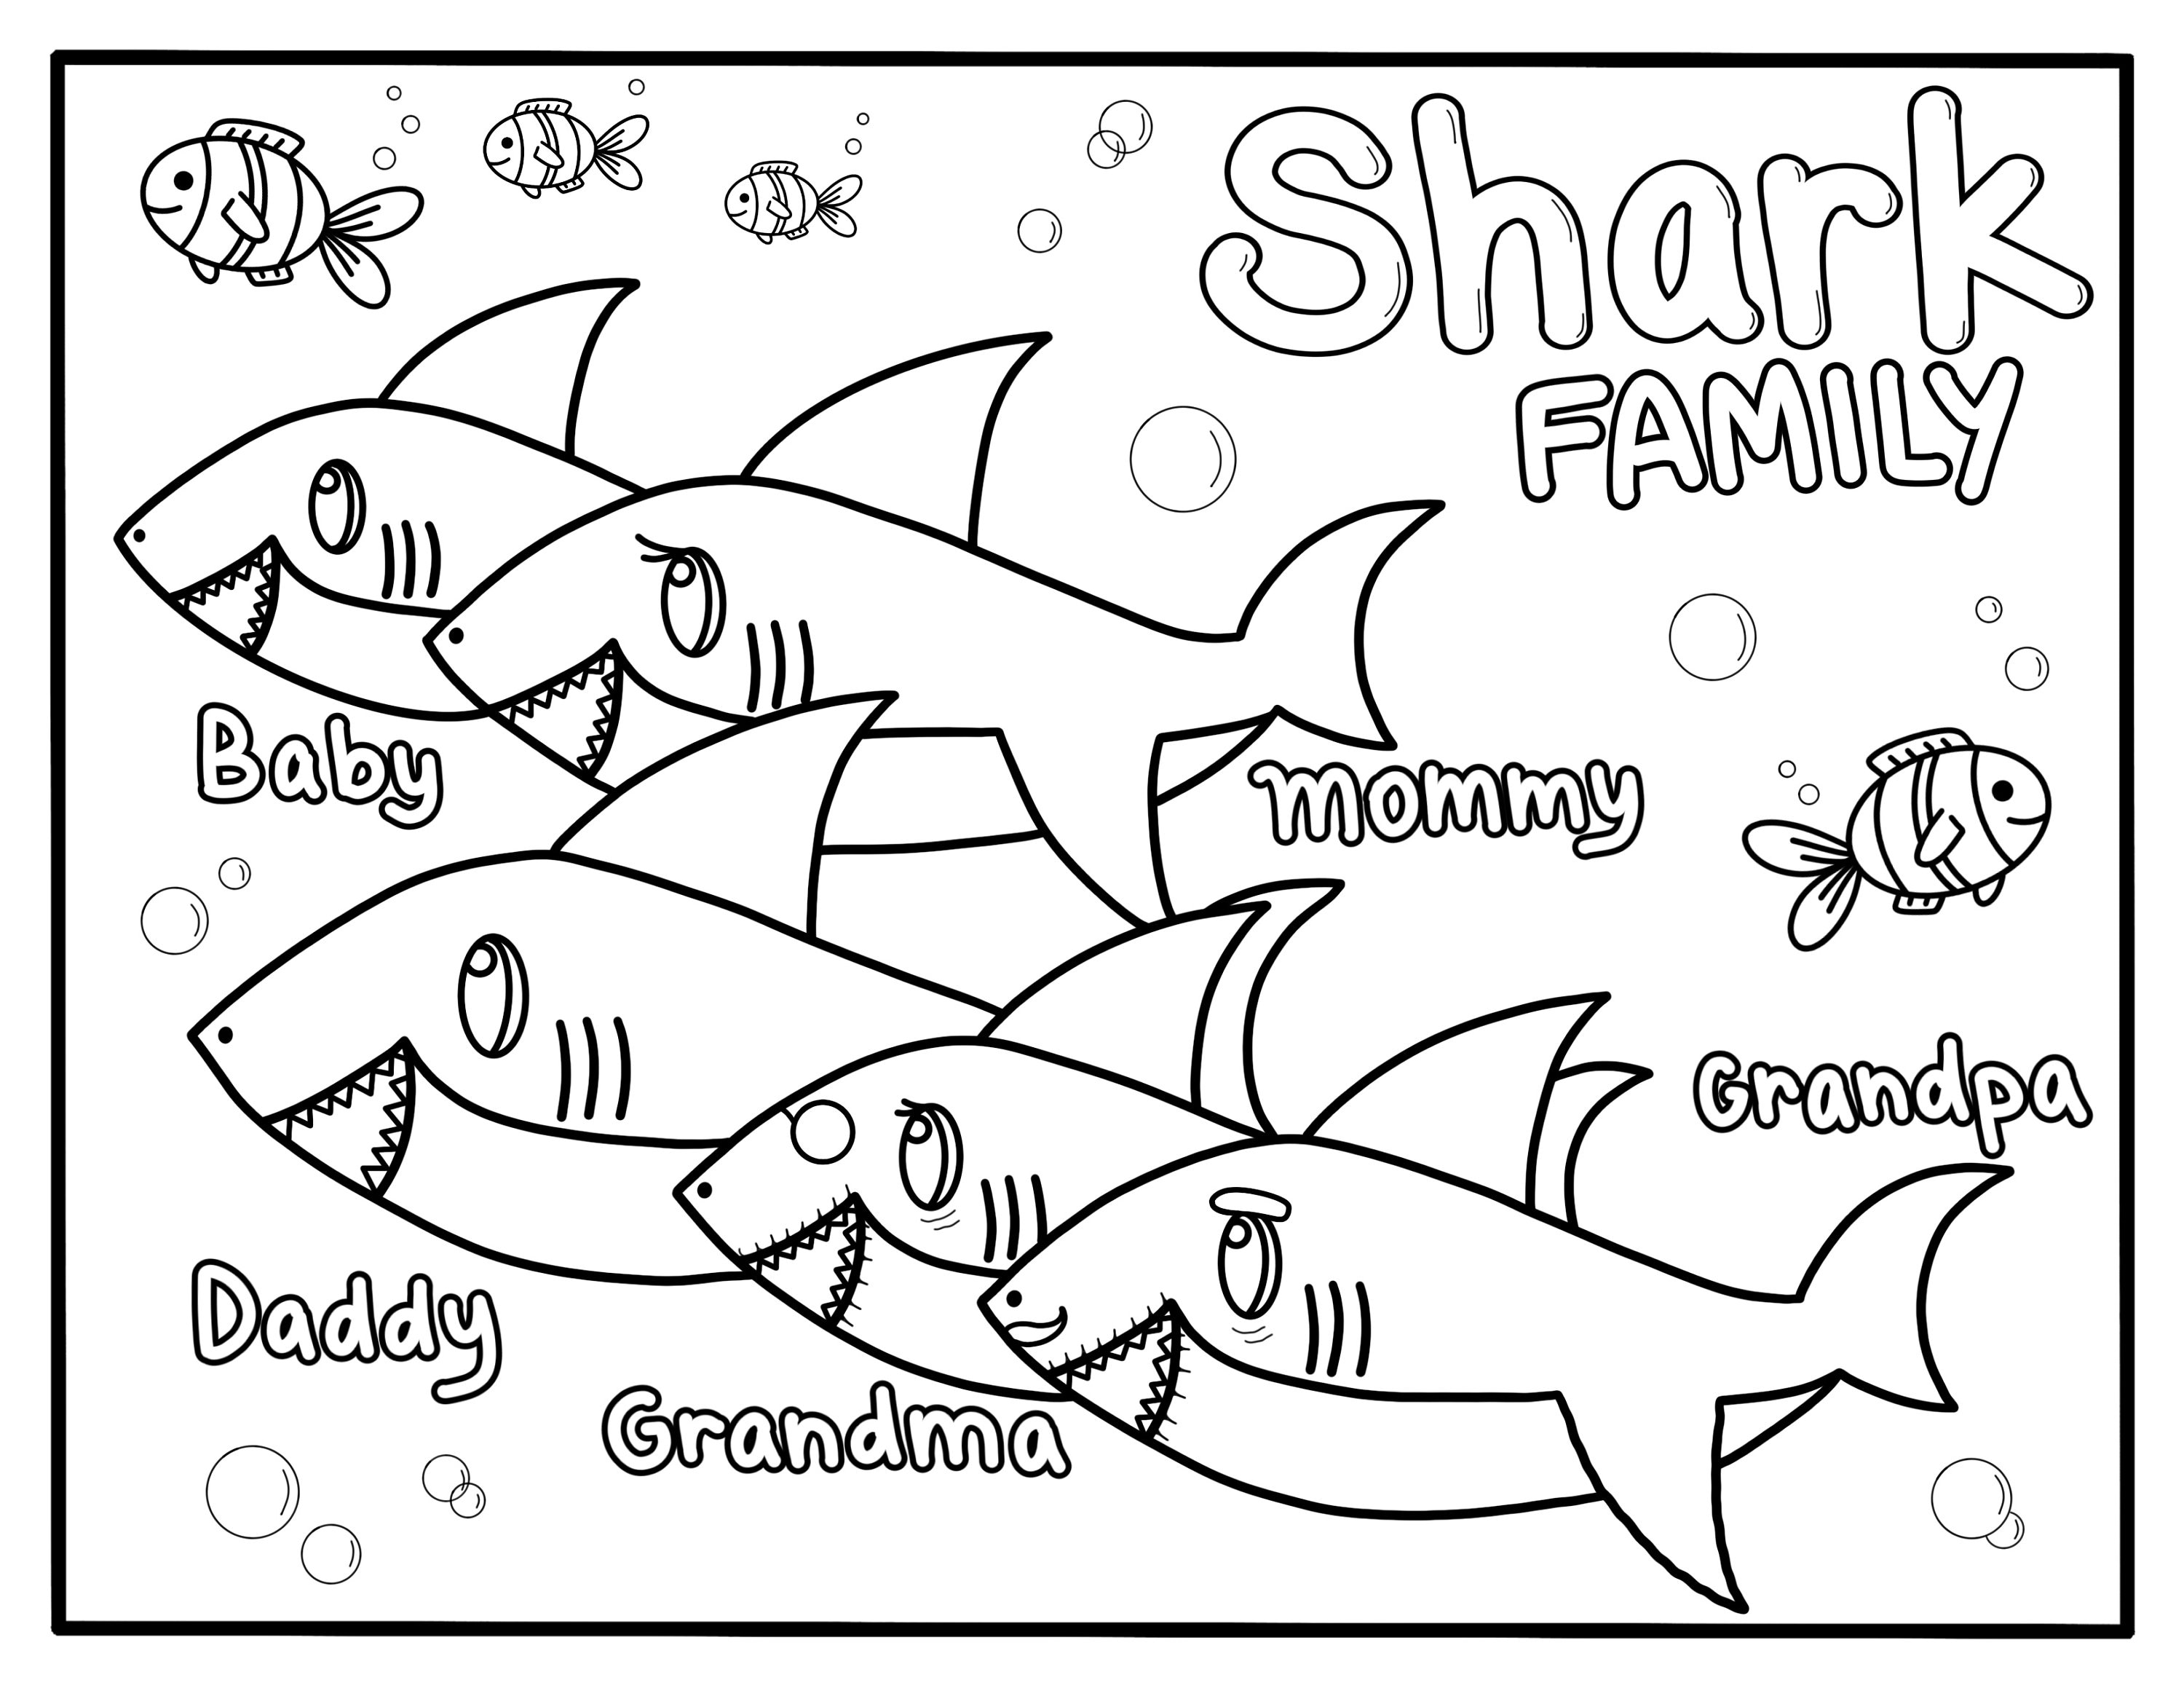 Baby shark family coloring page